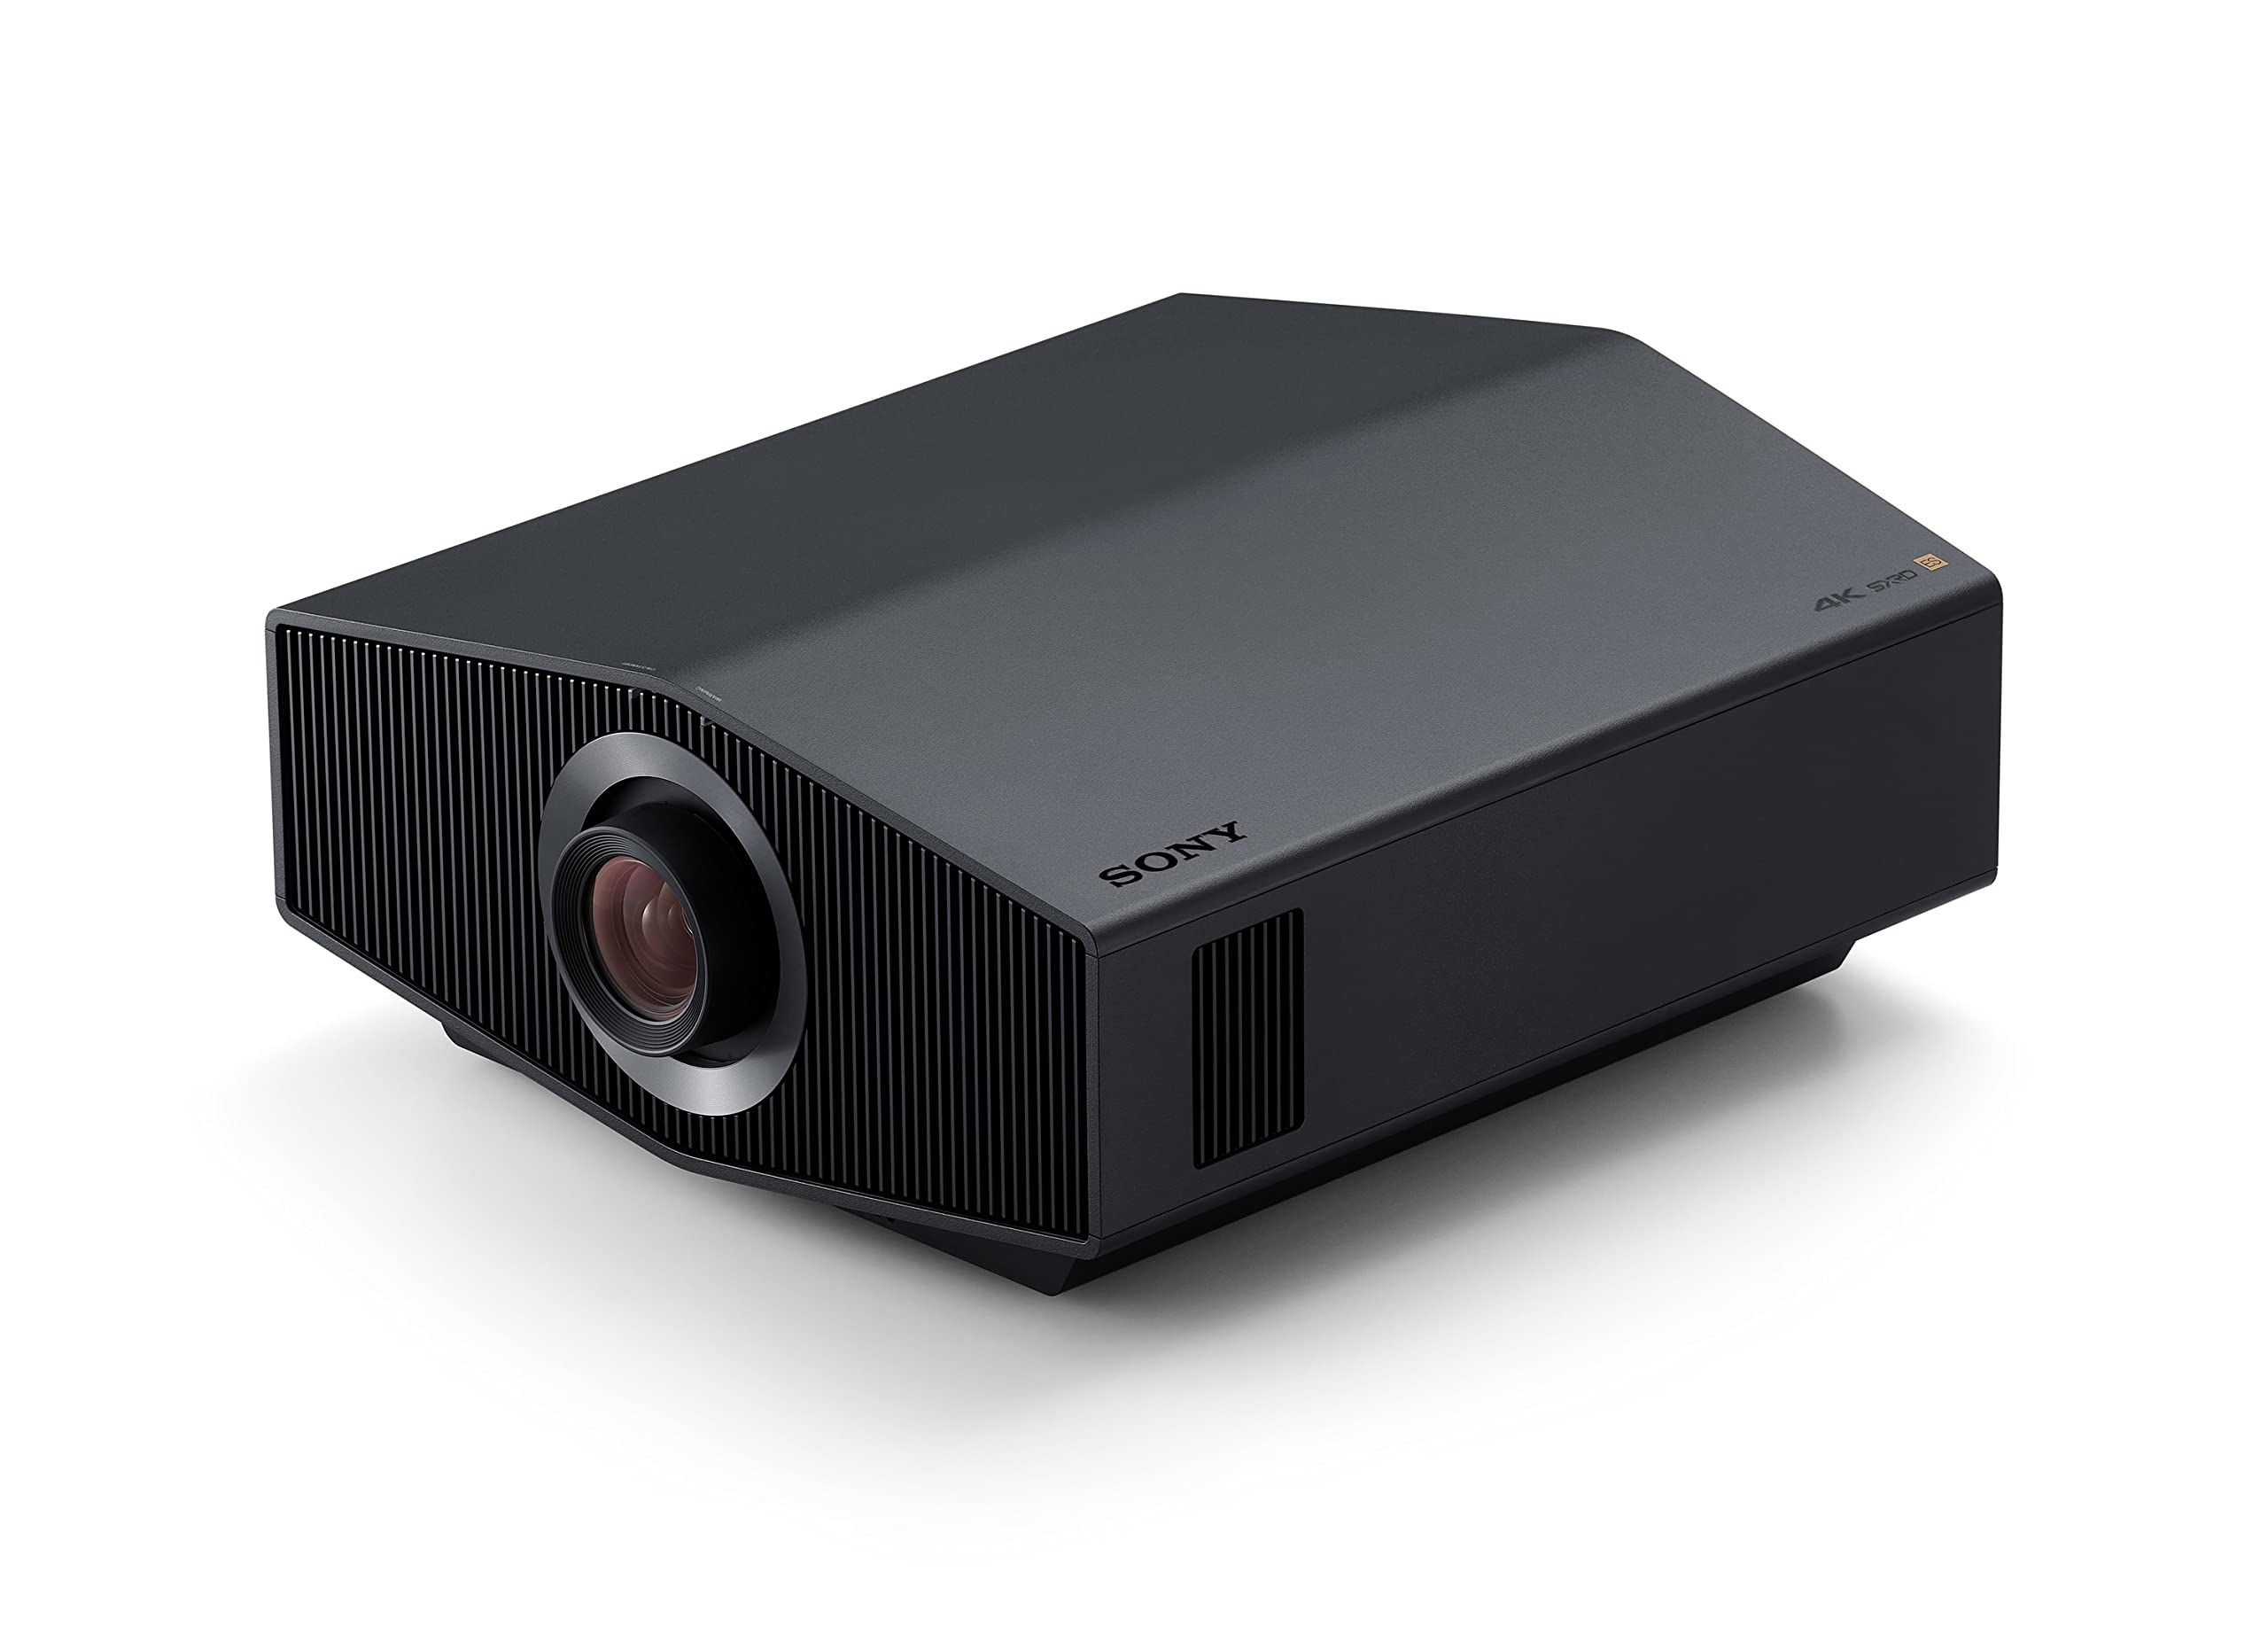 Sony VPL-XW6000ES 4K HDR Laser Home Theater Projector with Native 4K SXRD Panel, Black